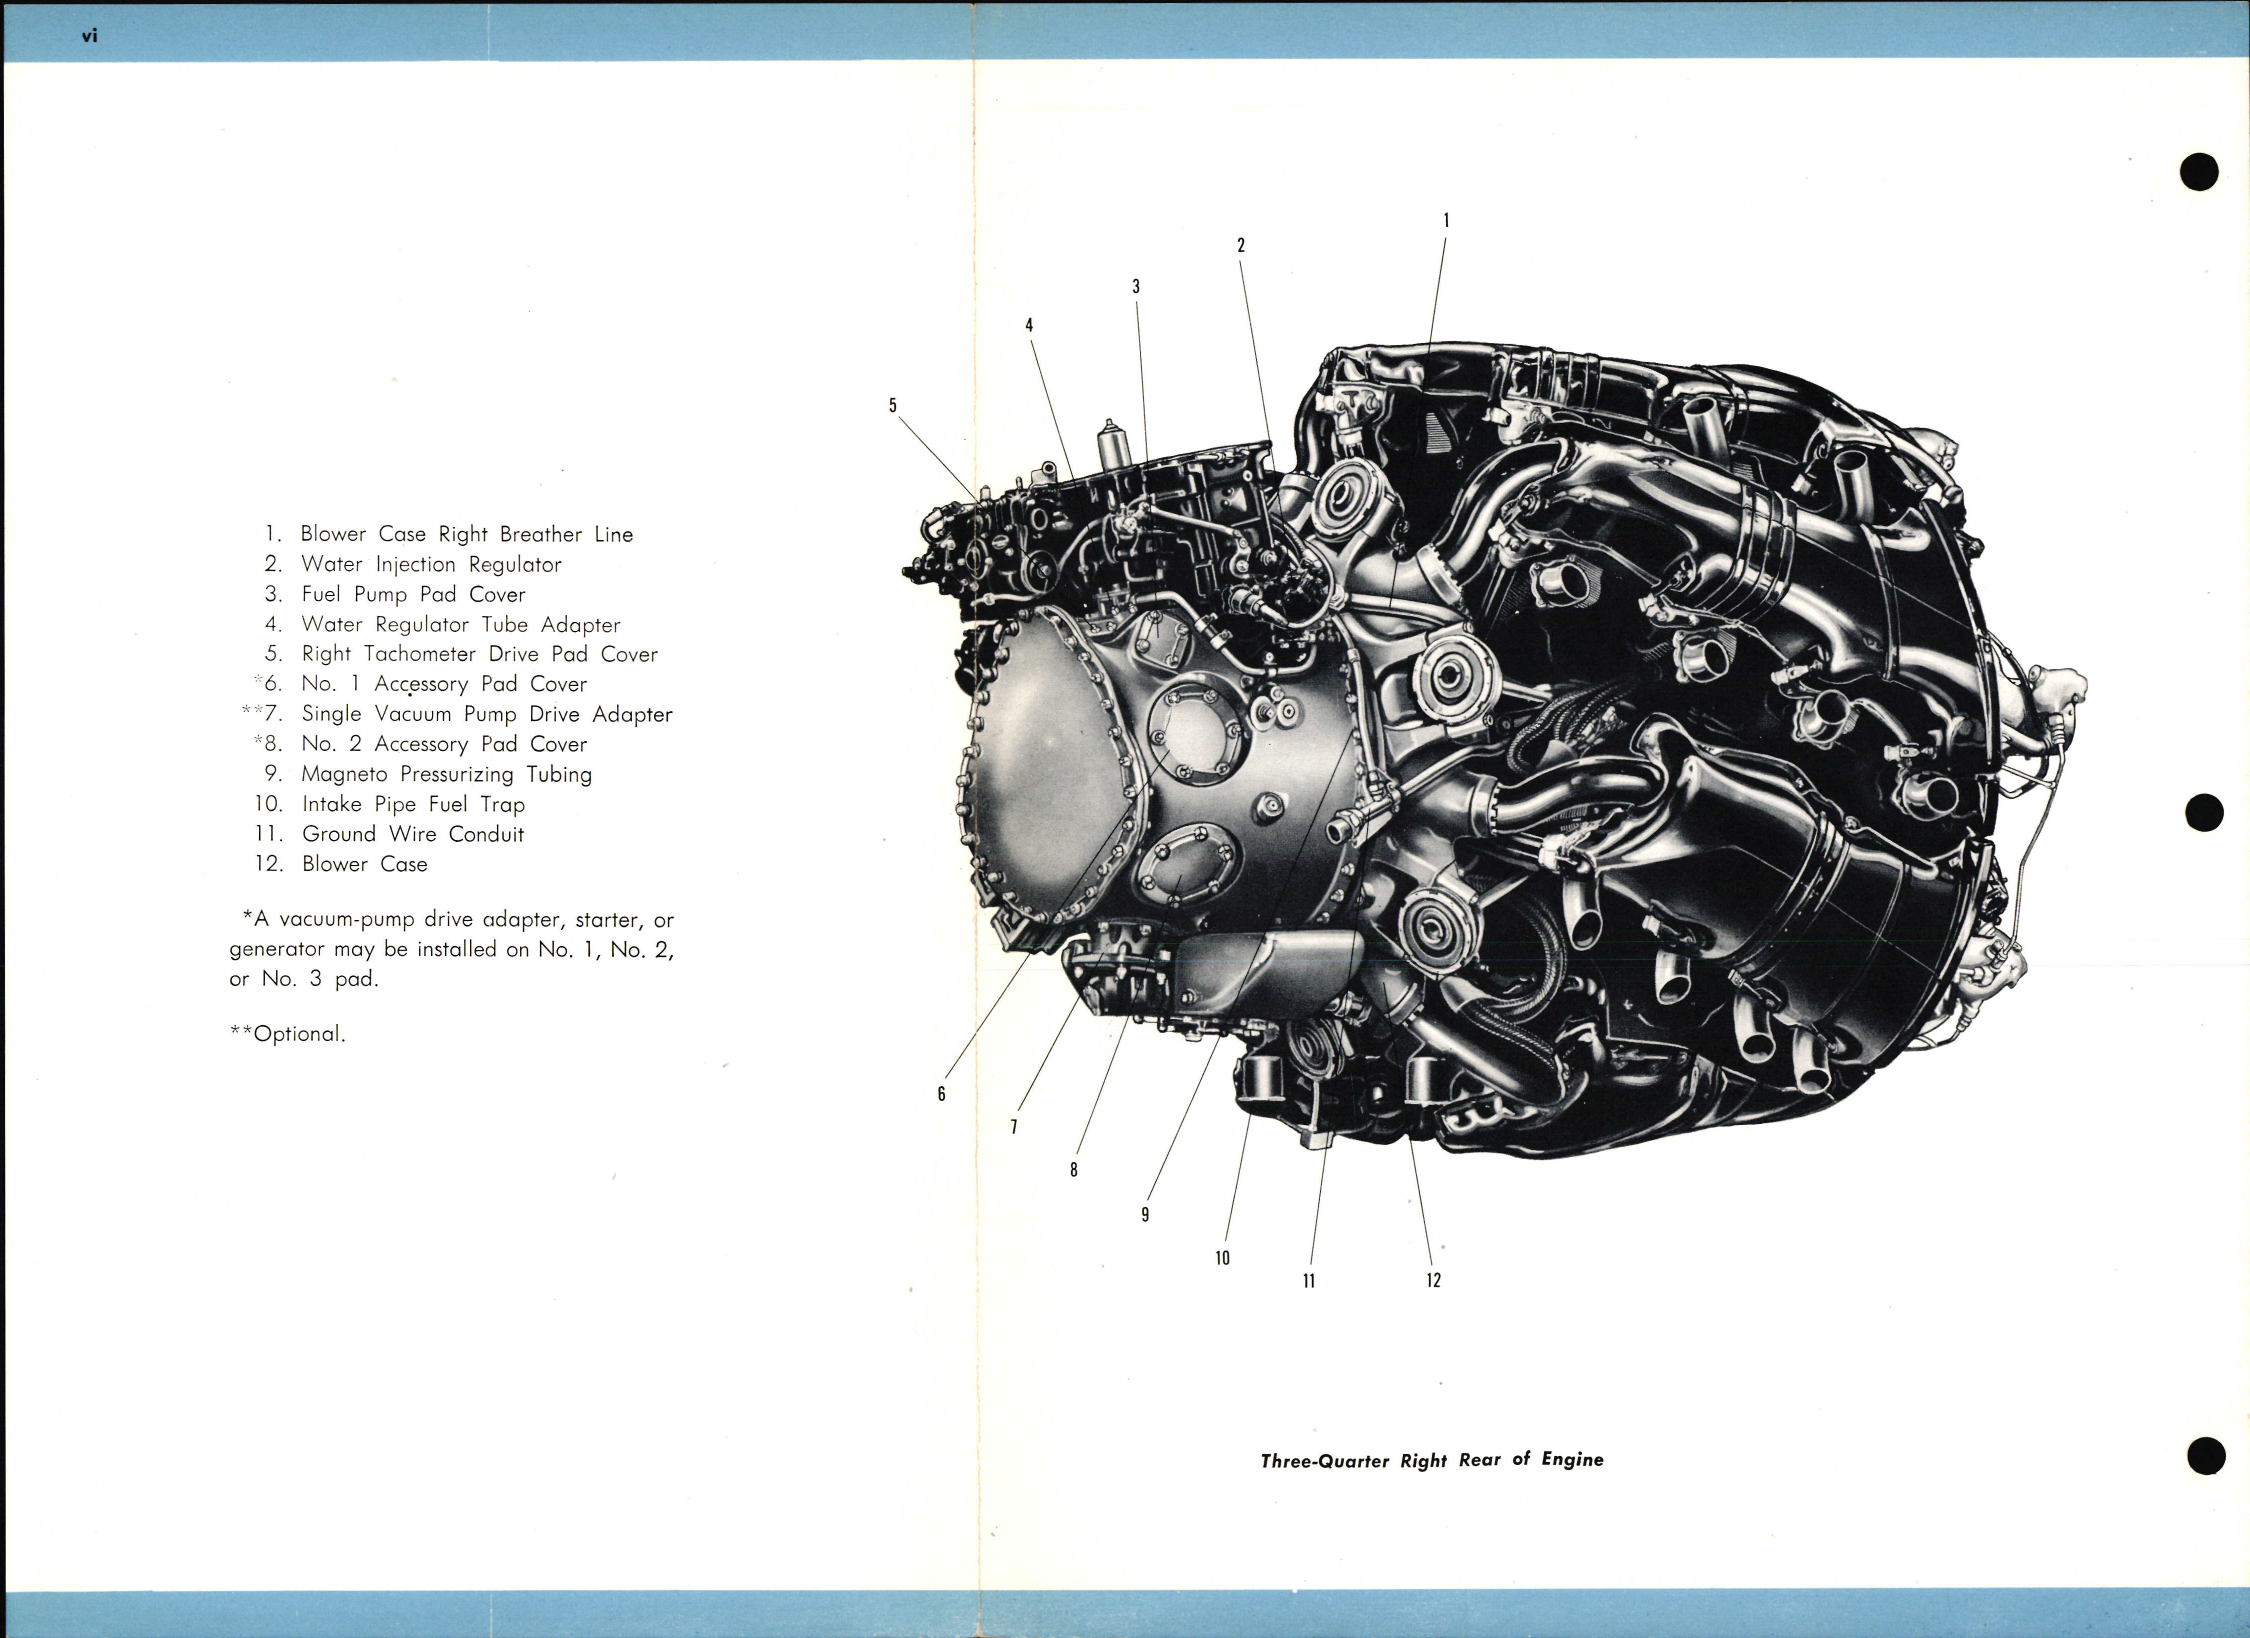 Sample page 6 from AirCorps Library document: Maintenance and Service for Wasp Major R-4360 Engines